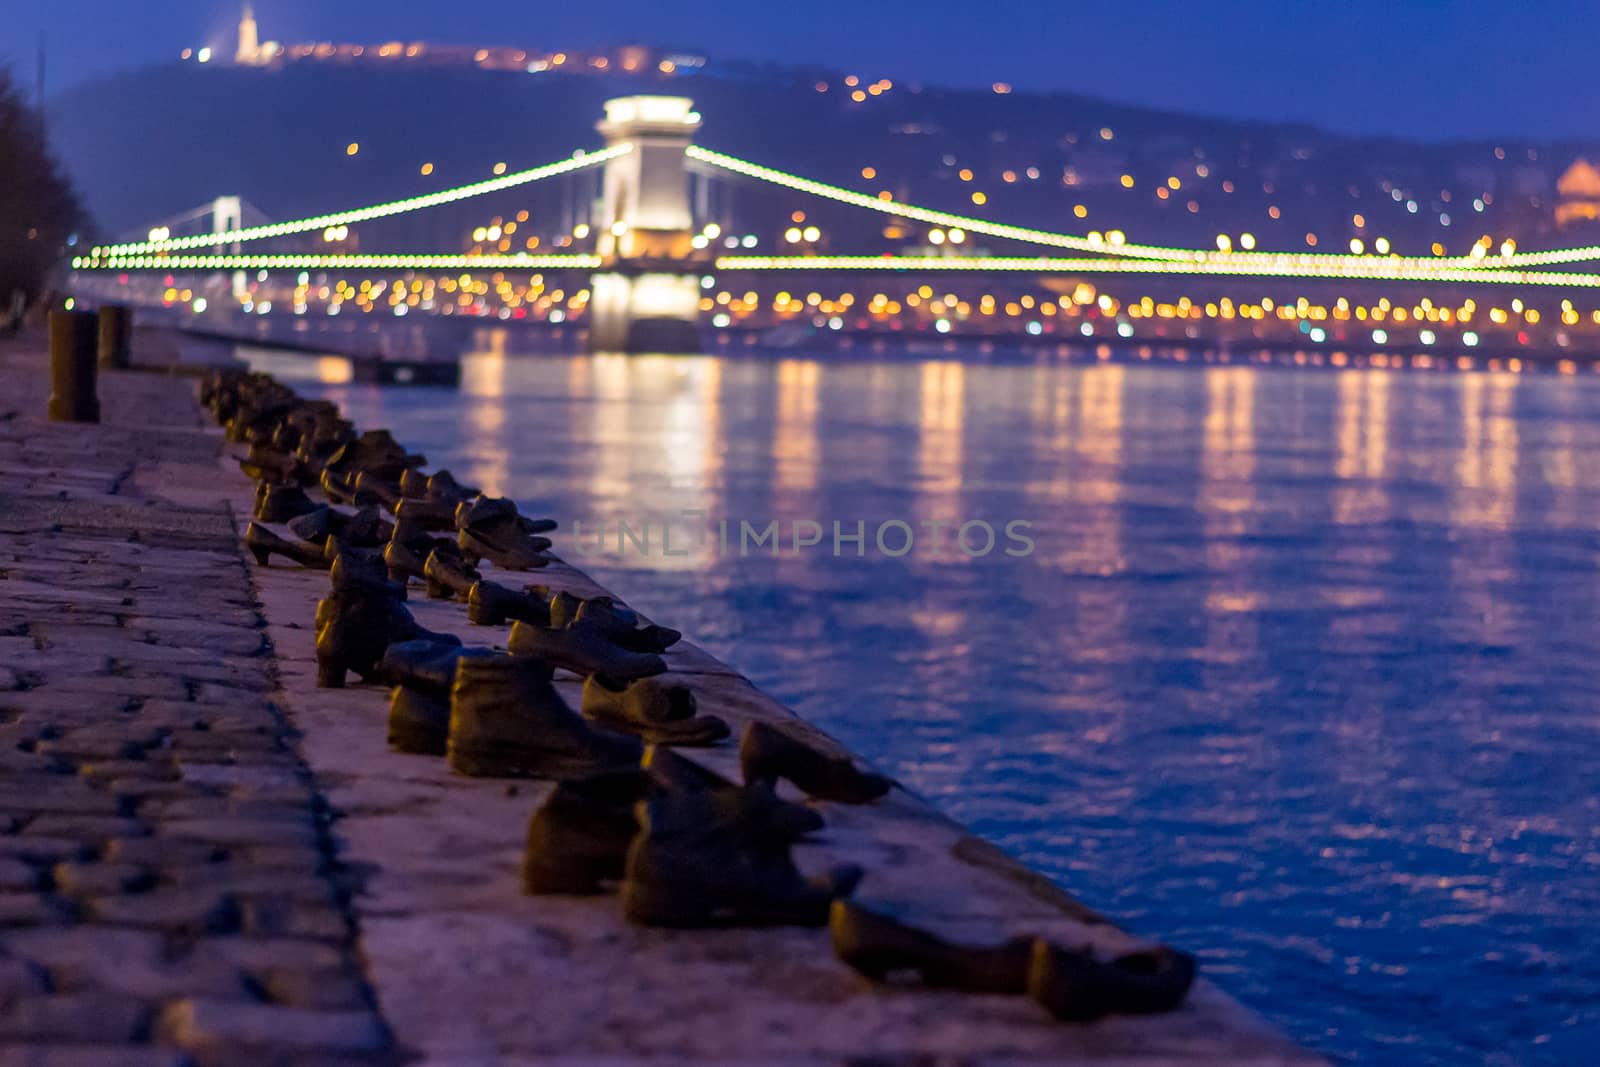 Budapest, Hungary: shoes on the danube monument at night chain bridge and city skyline in the background